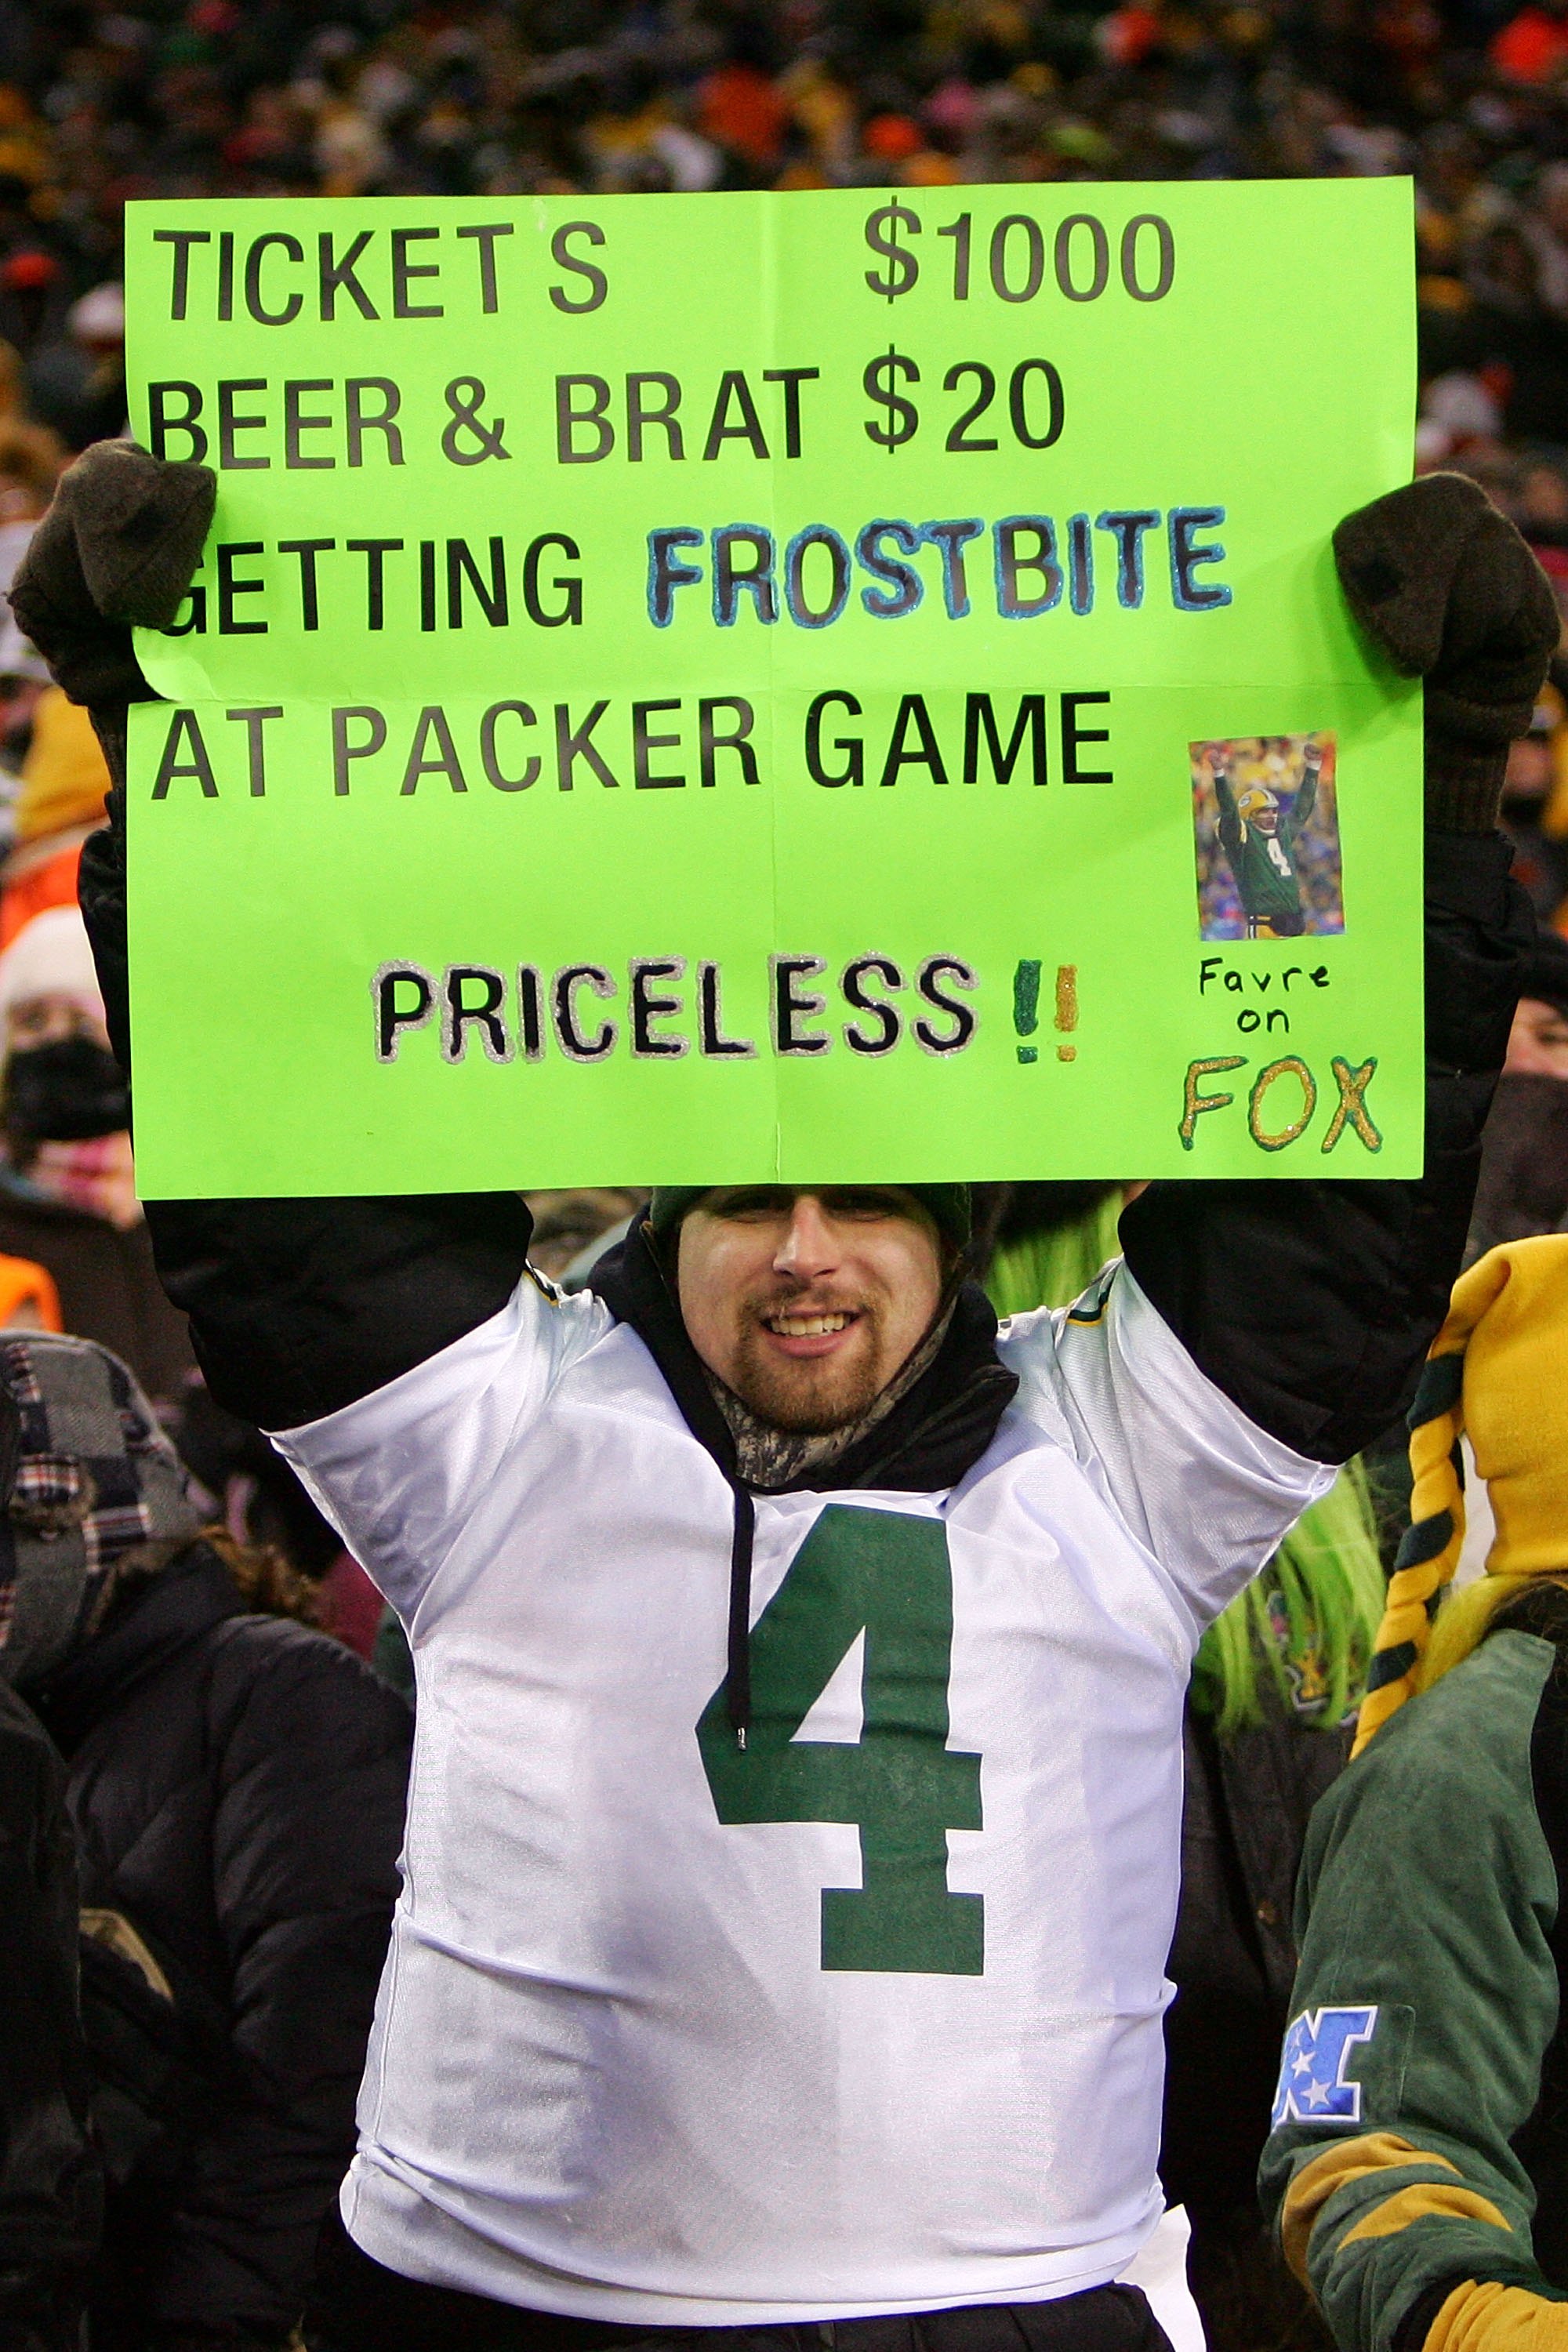 GREEN BAY, WI - JANUARY 20:  A fan of the Green Bay Packers holds up a sign during the NFC championship game against the New York Giants on January 20, 2008 at Lambeau Field in Green Bay, Wisconsin. The Giants defeated the Packers 23-20 in overtime to adv